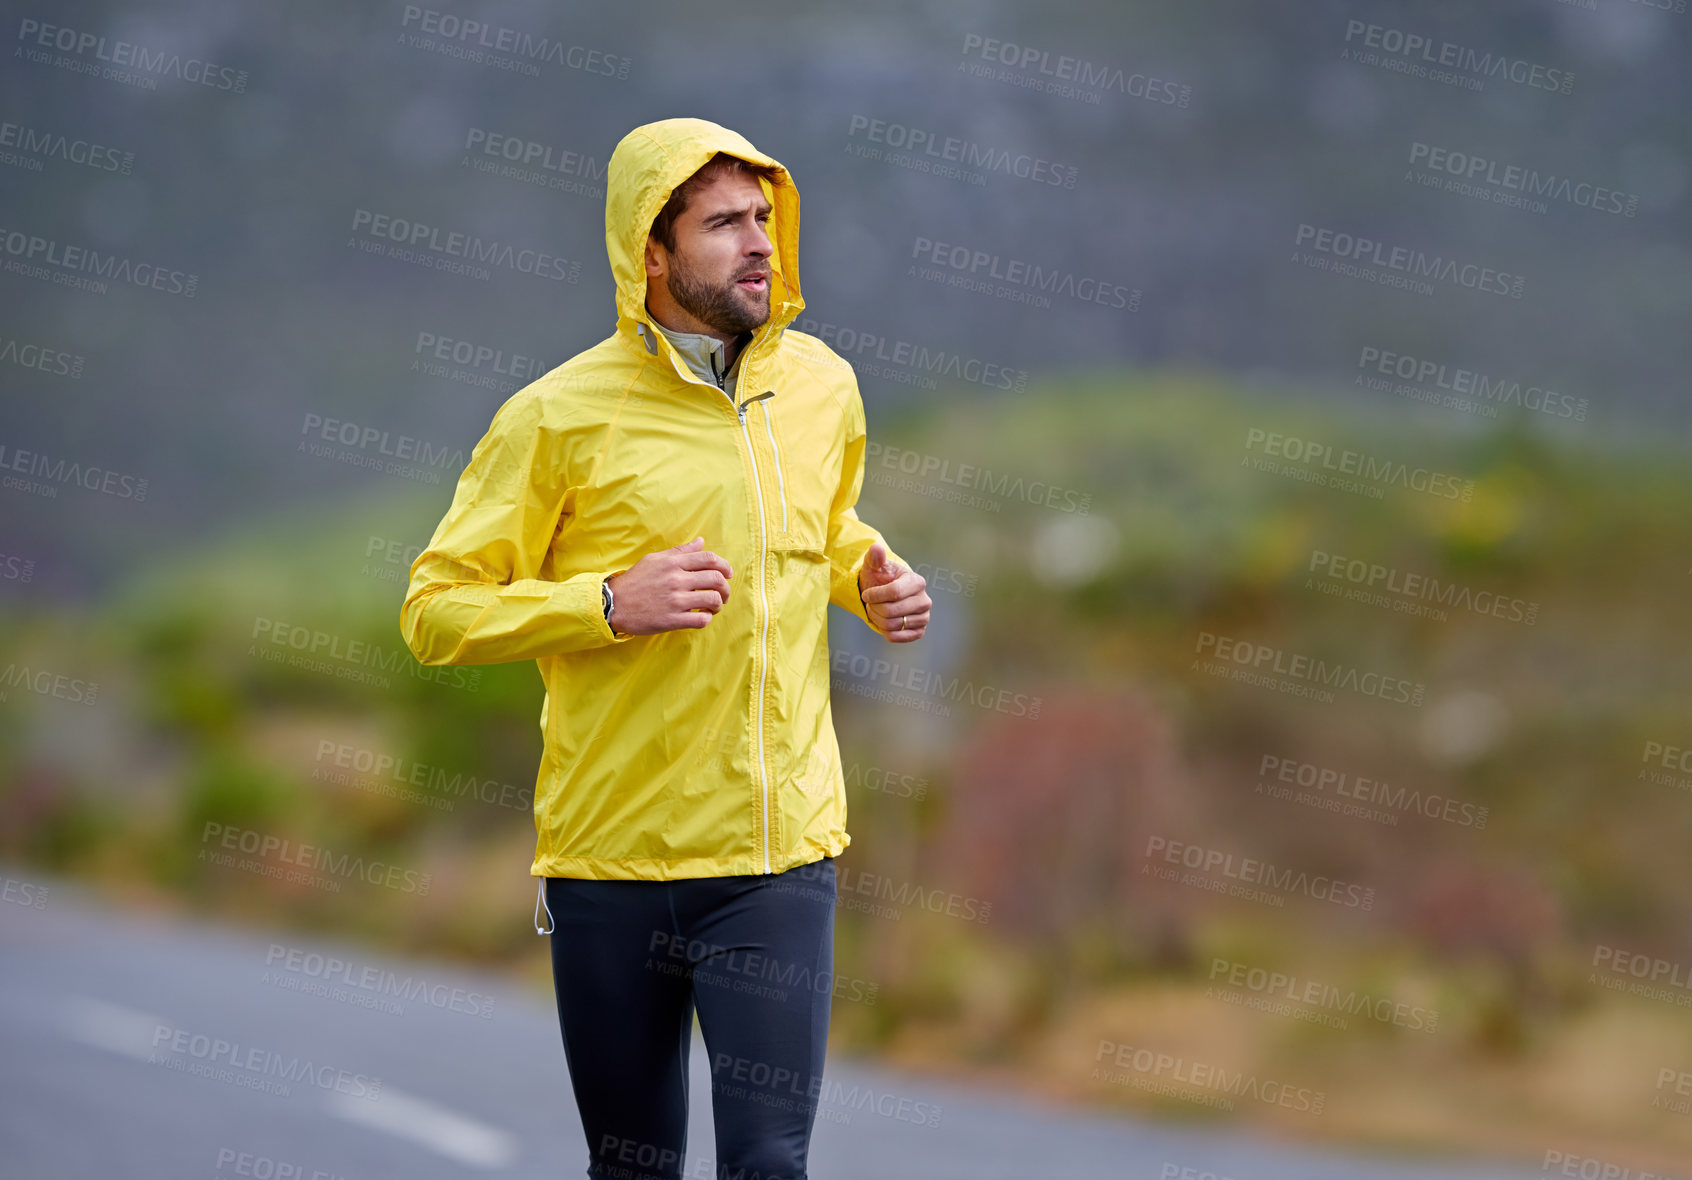 Buy stock photo Shot of a handsome young man running in rainy weather